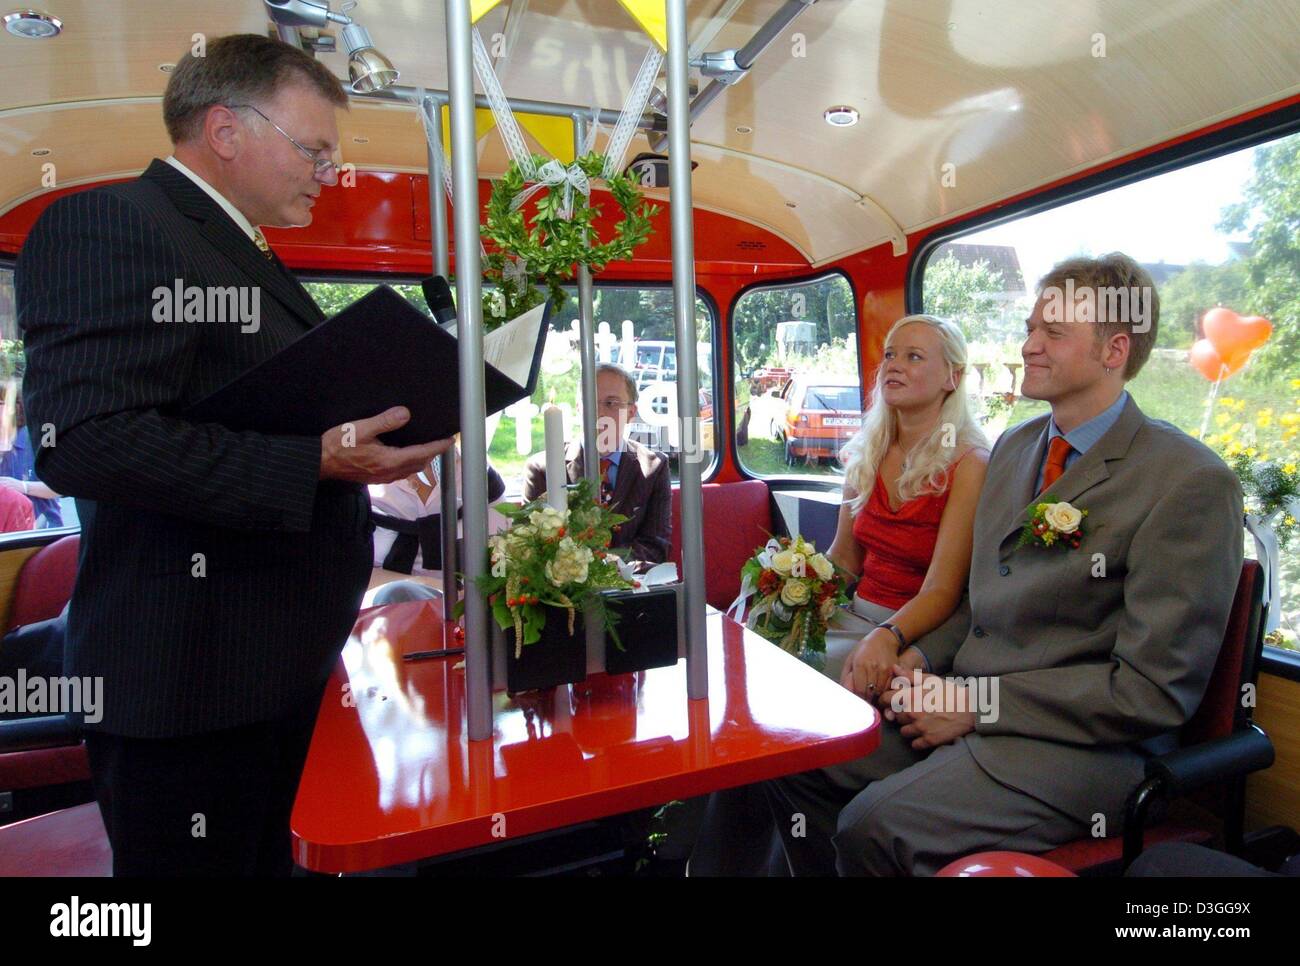 (dpa) - The wedding couple Gabriela Propp and Marc Neben are married by Flintbek's mayor and registrar Horst-Dieter Lorenzen (L) in a refurbished public transport bus in Kleinflintbek, Germany, 3 September 2004. They were the first couple to be married inside a bus of the public transport company KVG in Kiel. Stock Photo